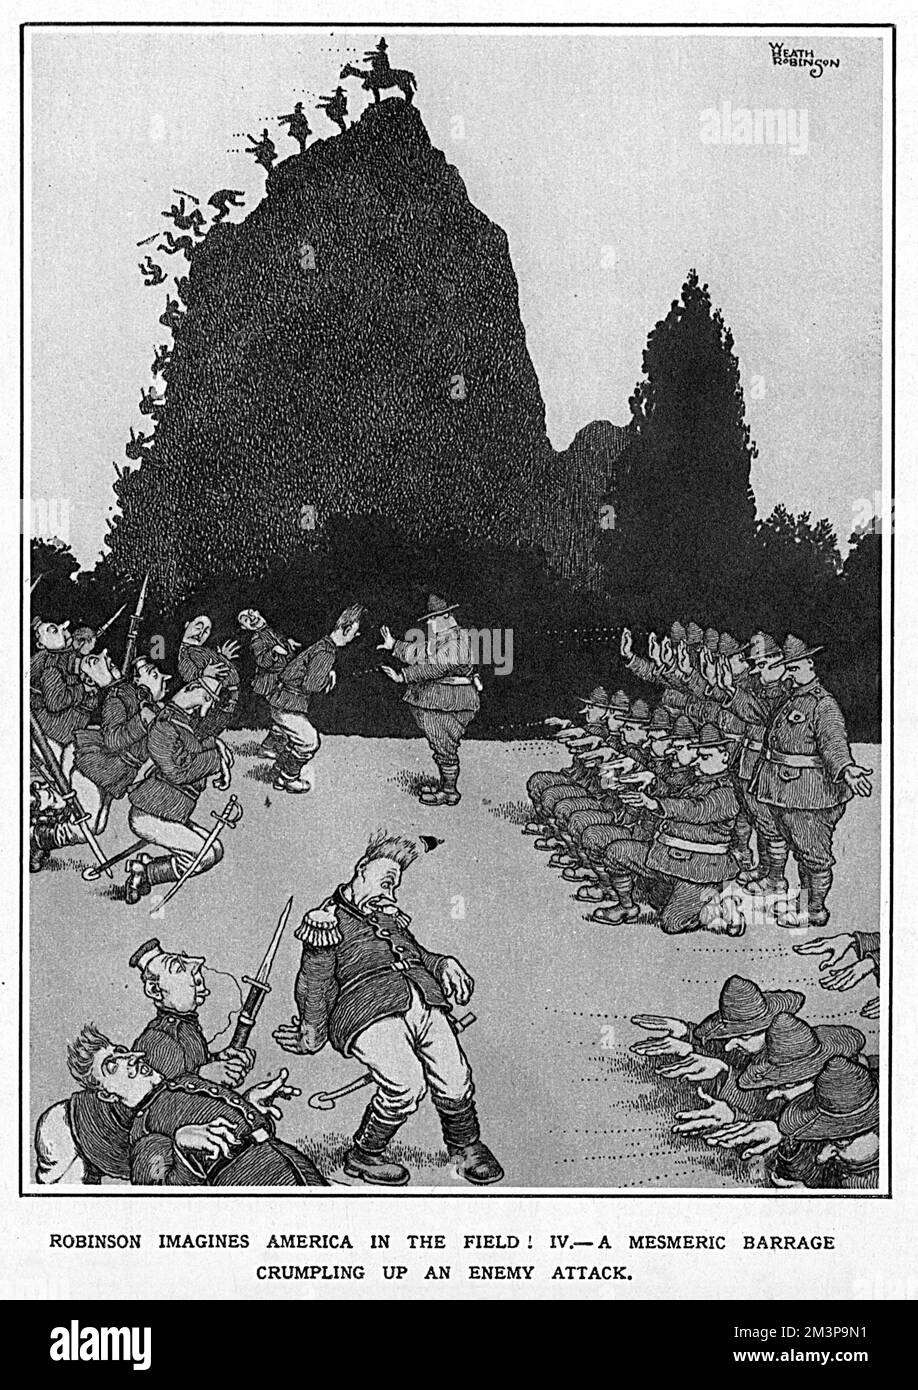 War Inventions Not Needed Now!  William Heath Robinson imagines America in the field!  4. A mesmeric barrage crumpling up an enemy attack.       Date: 1918 Stock Photo